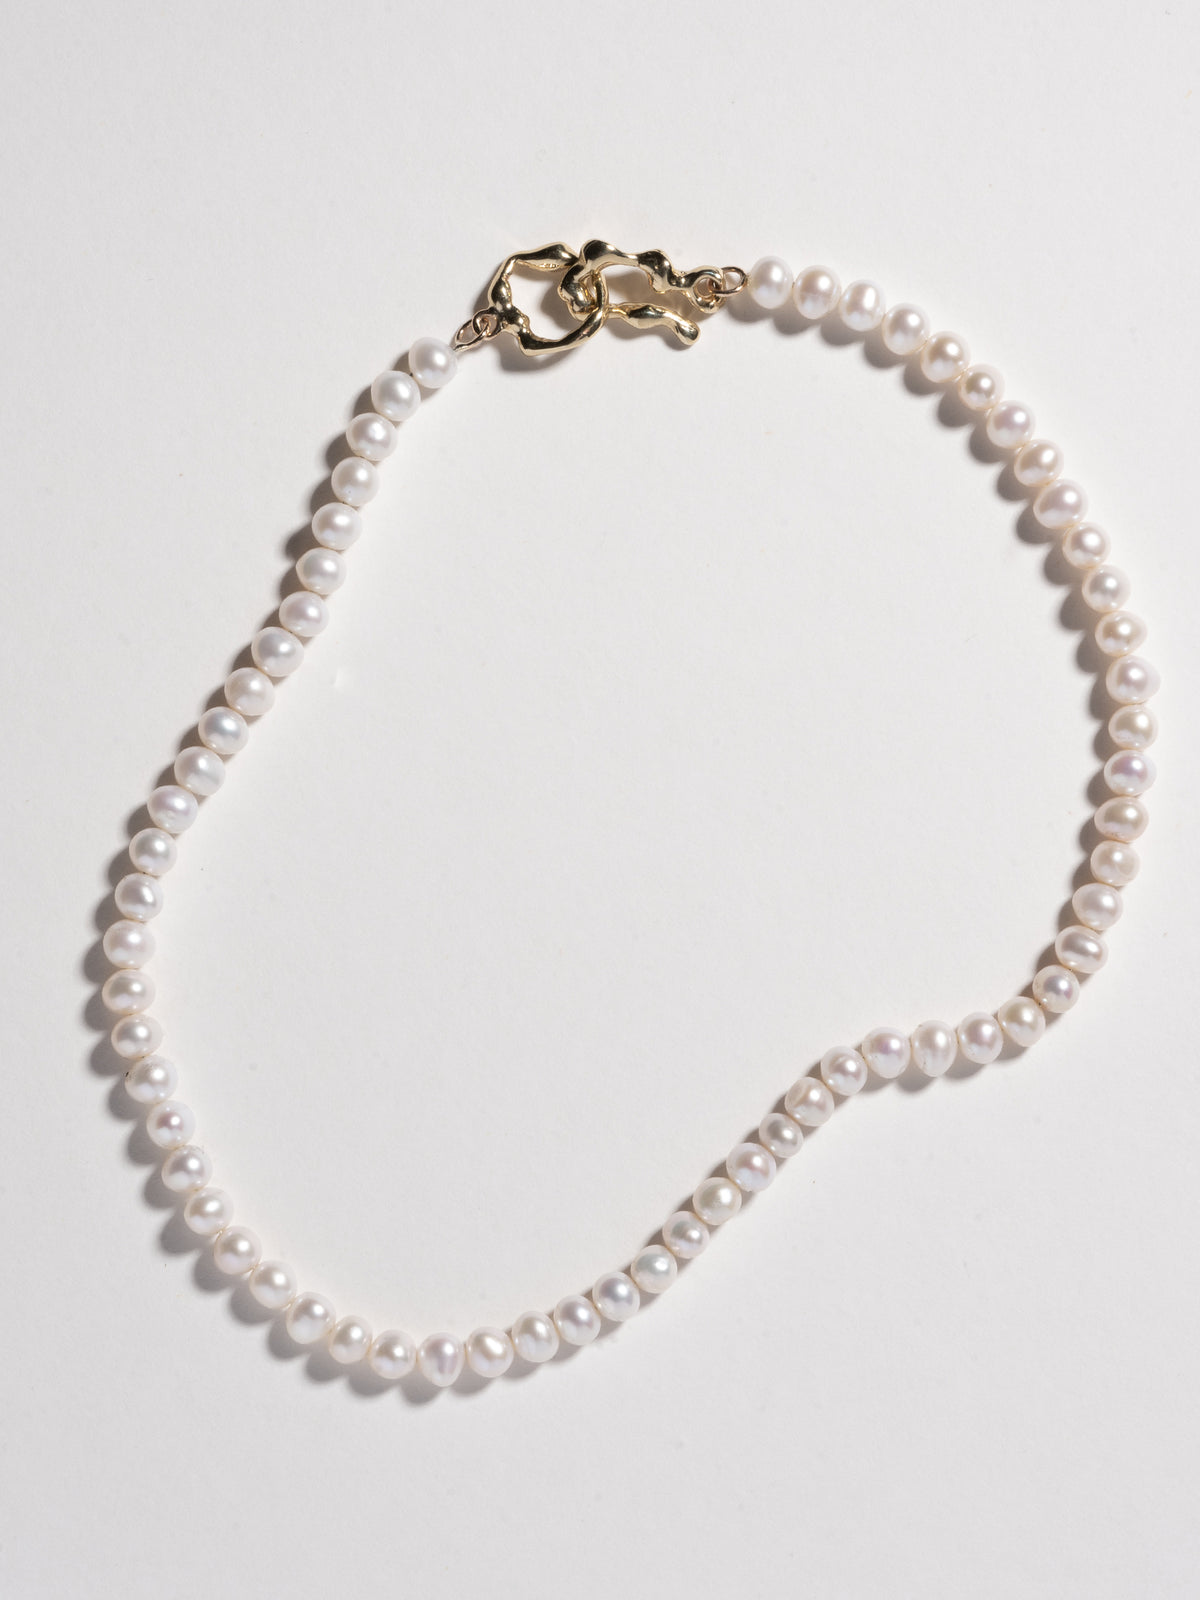 EGG Collar in 14k gold plate closing a string of pearls